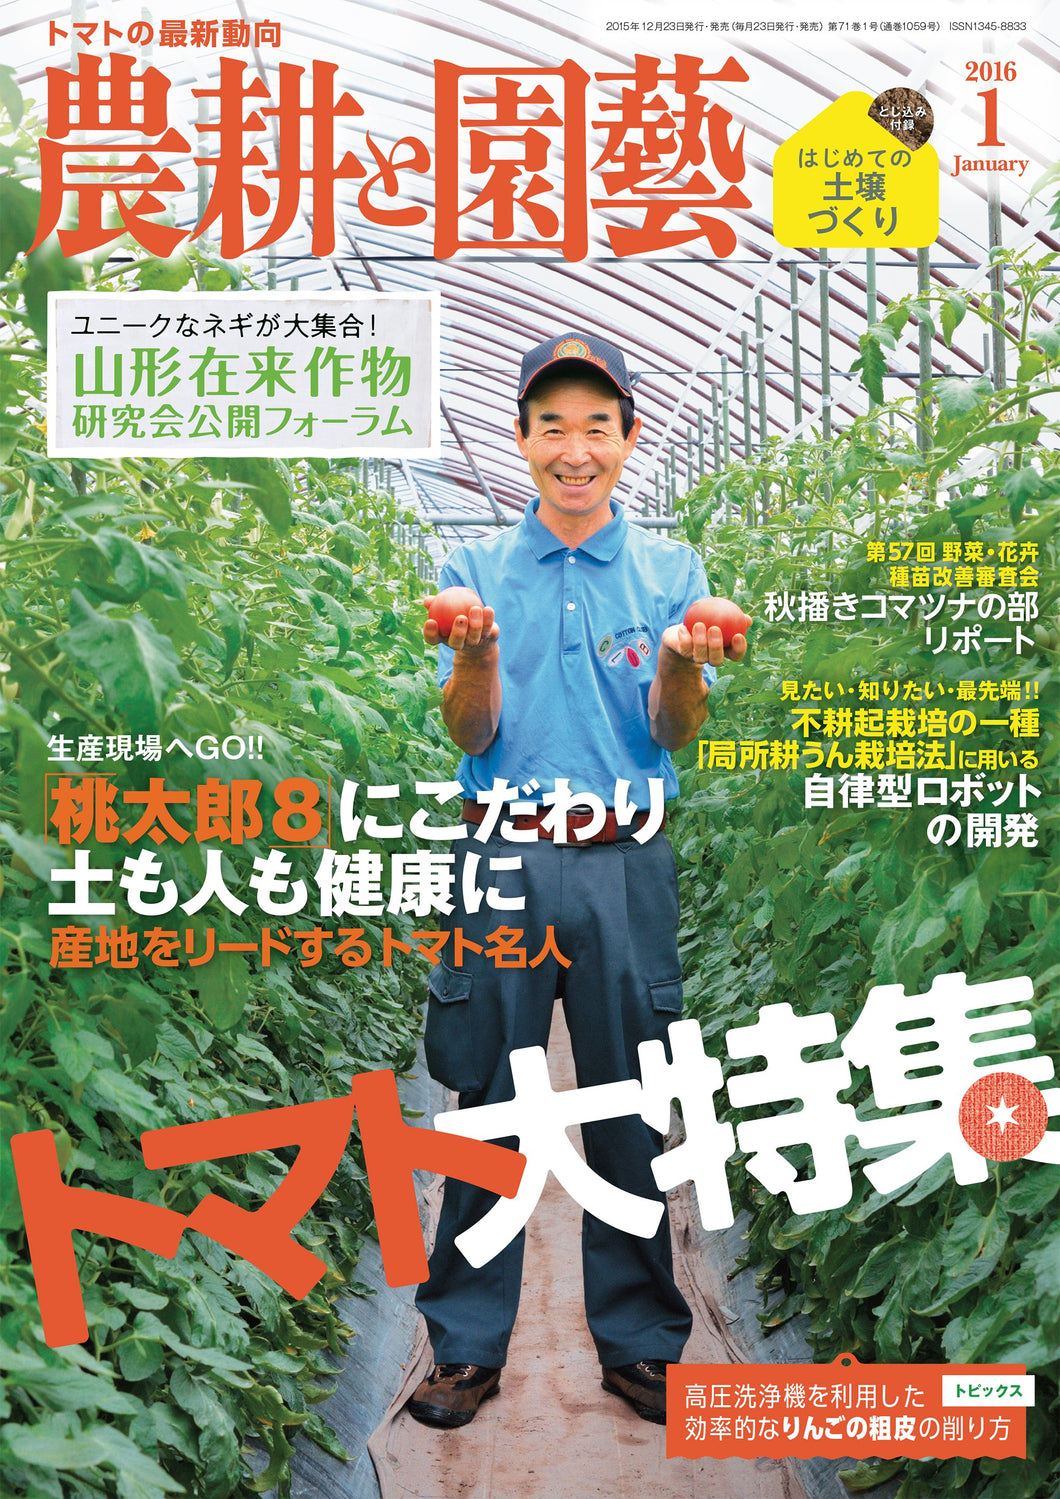 Agriculture and Horticulture January 2016 <Insert appendix>